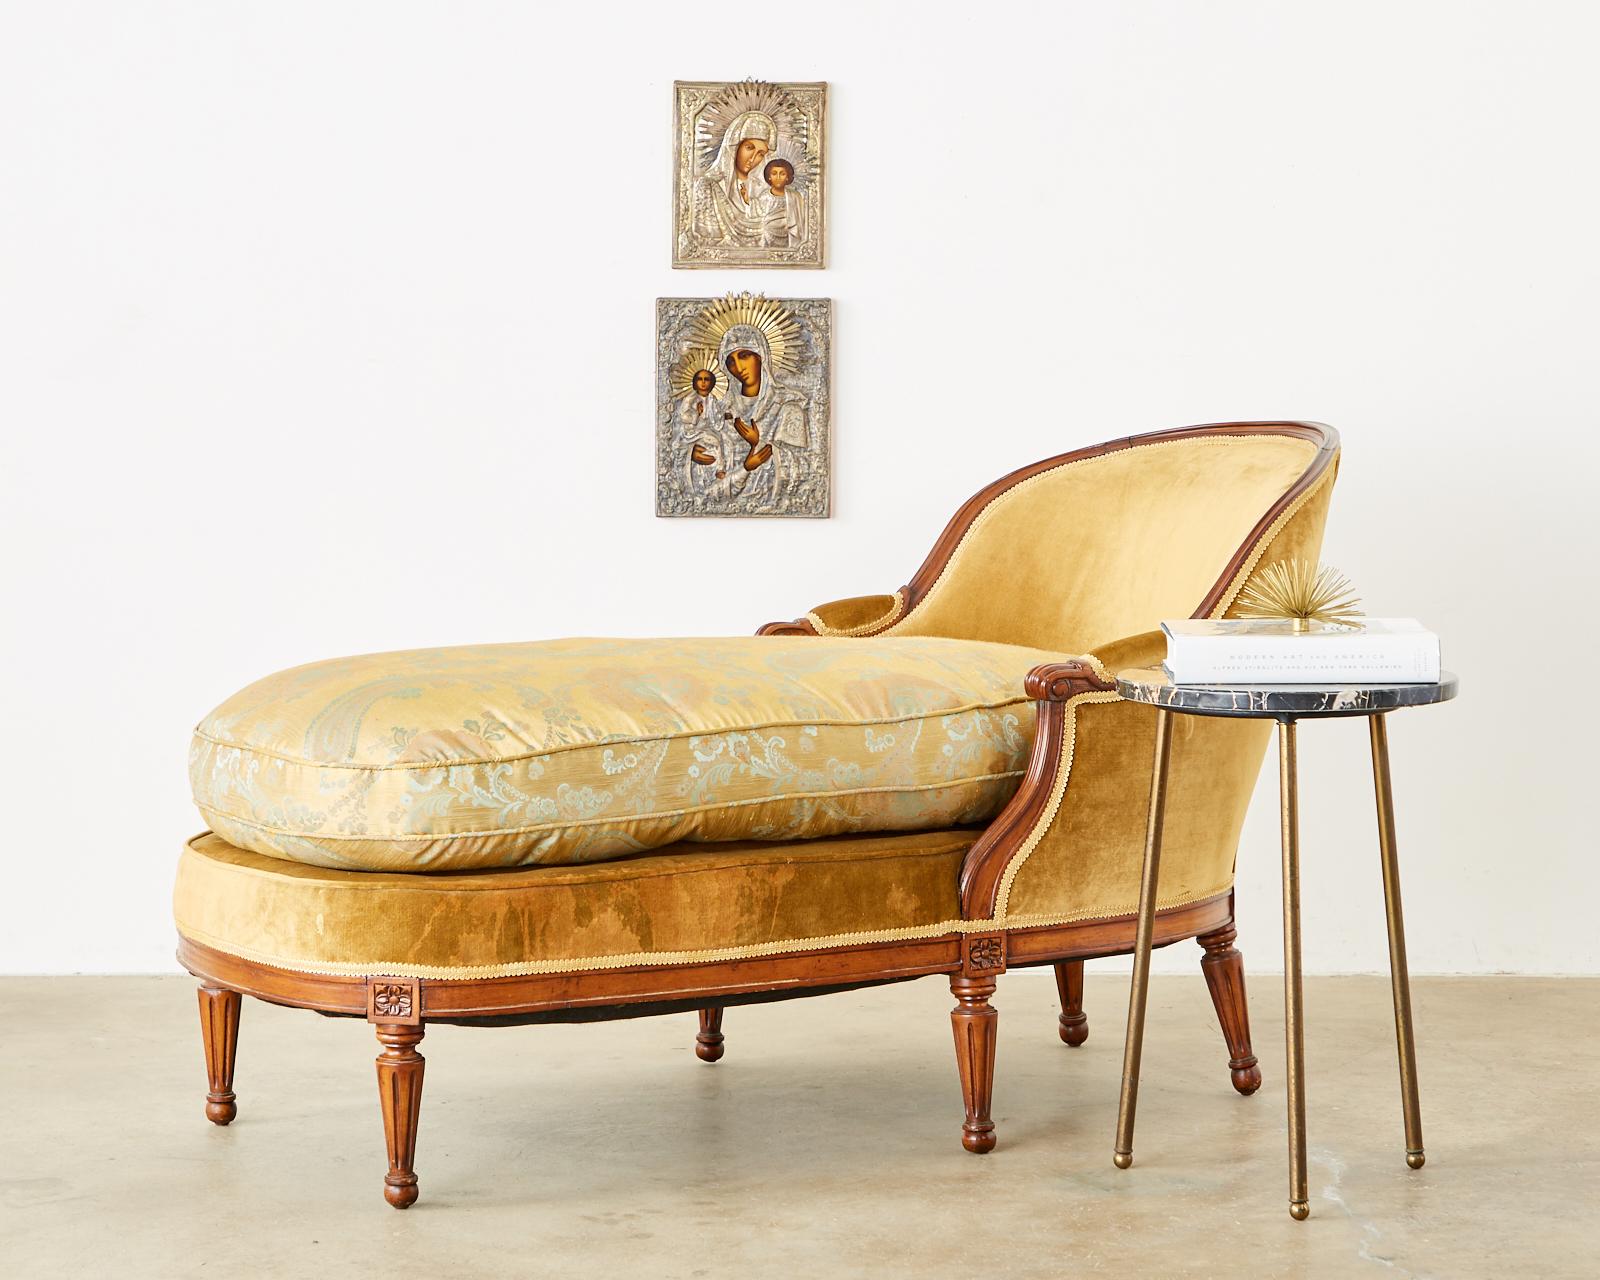 Gorgeous French mahogany chaise longue daybed made in the Louis XVI taste. The frame features a gracefully curved back ending with padded arms and scrolled ends. The lounge has been upholstered with velvet fabric and topped with an oversized loose